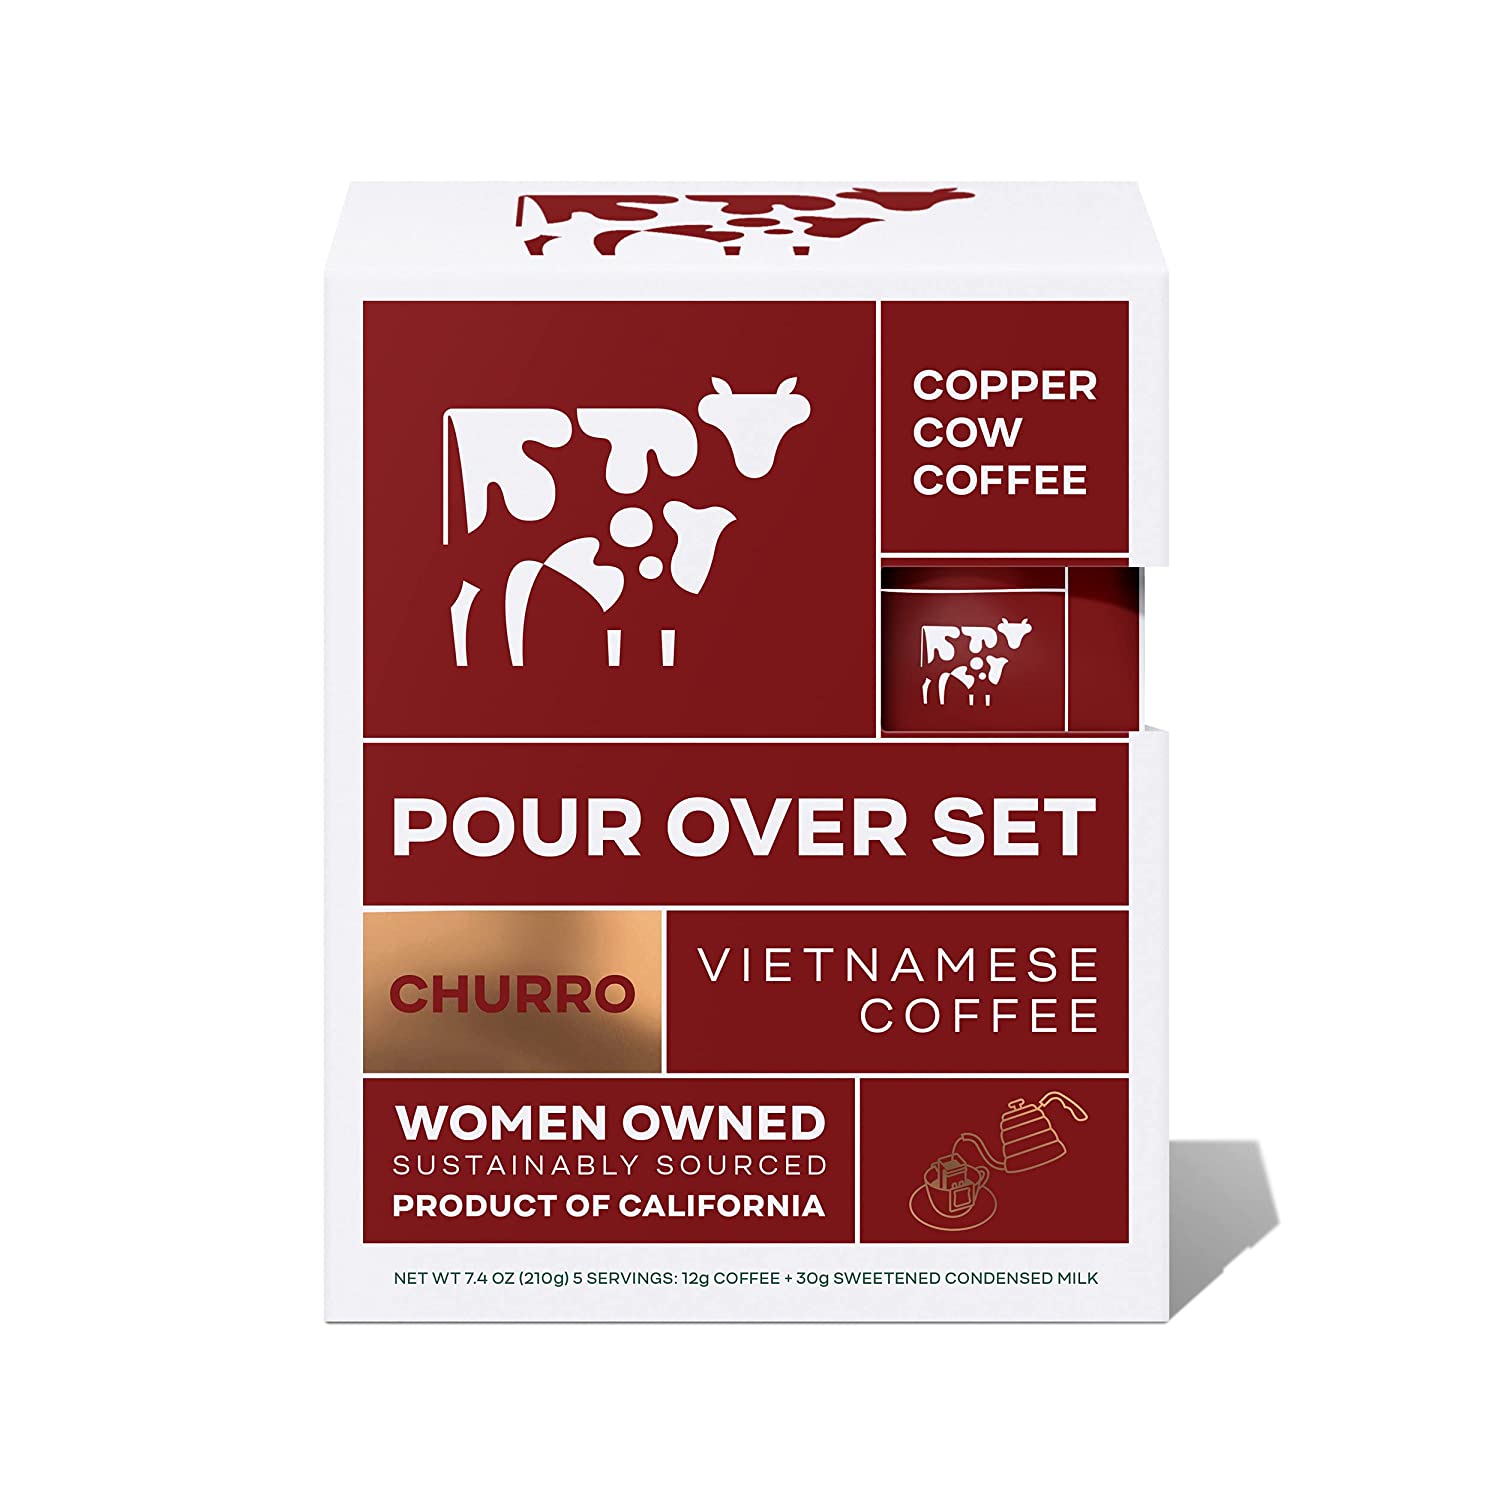 I tested Copper Cow's Vietnamese-style coffee packs and discovered that making my favorite drink on the move was simple